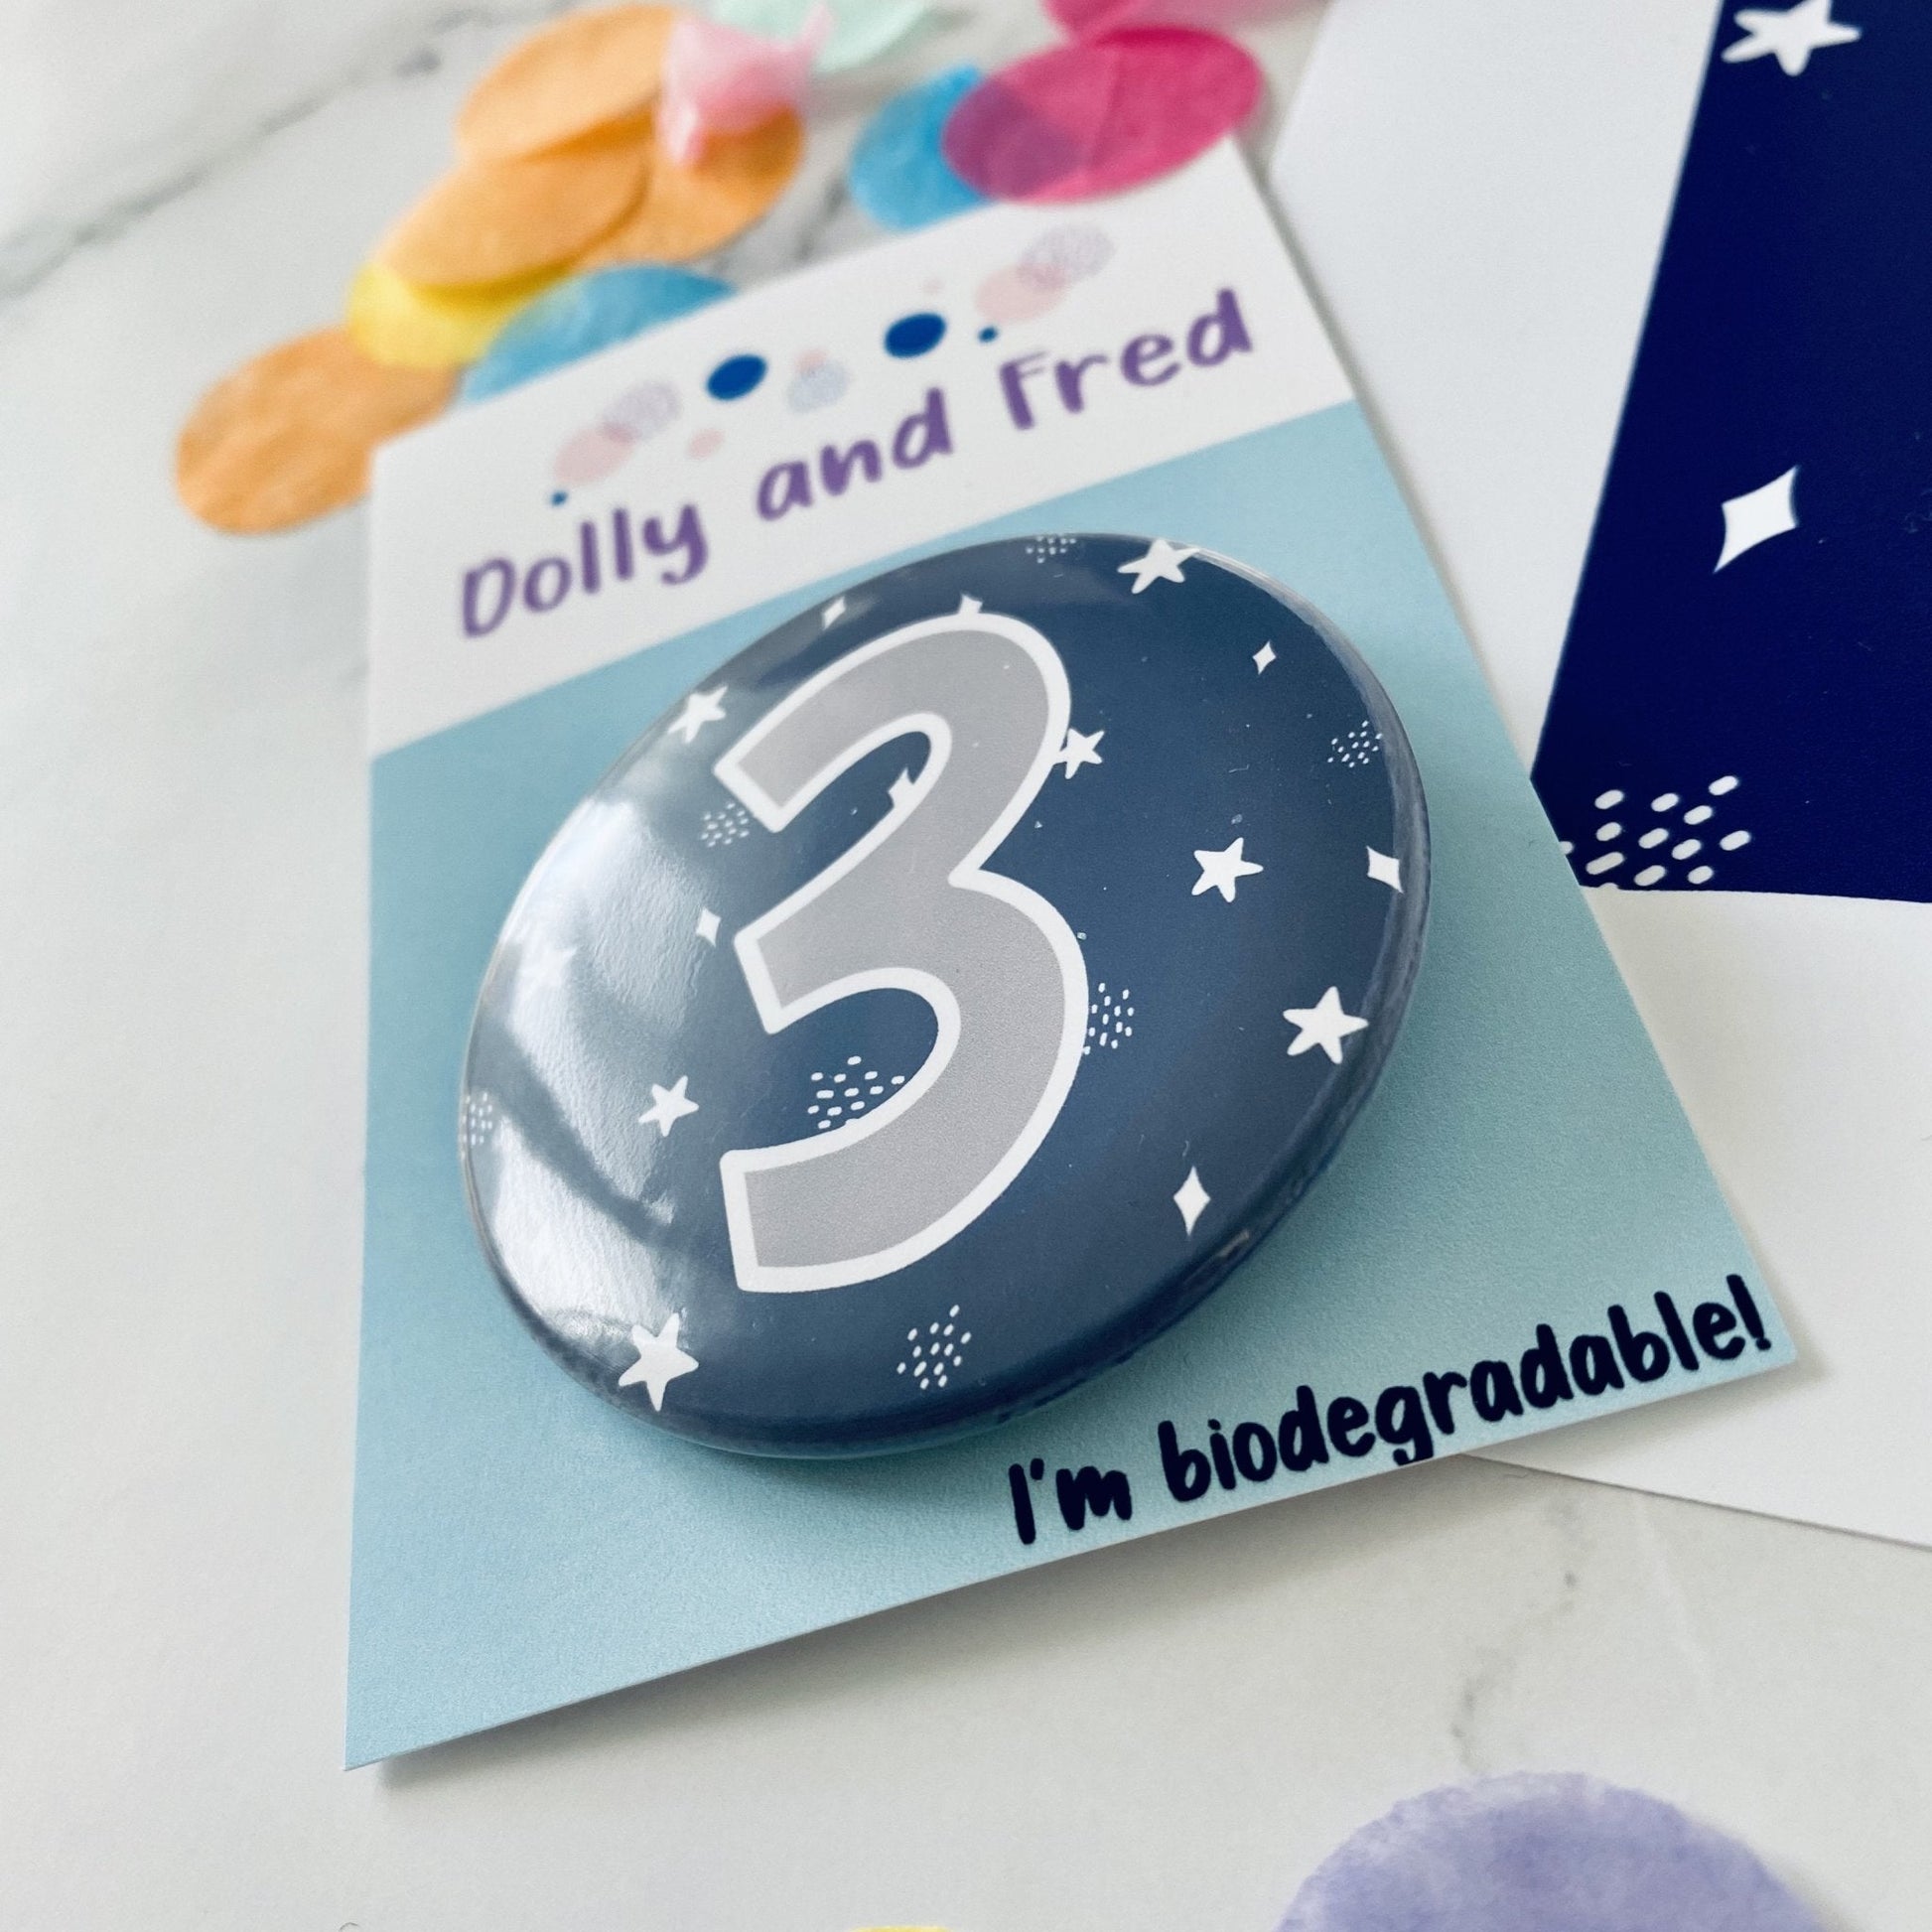 Navy Blue Number Badge - Dolly and Fred Designs